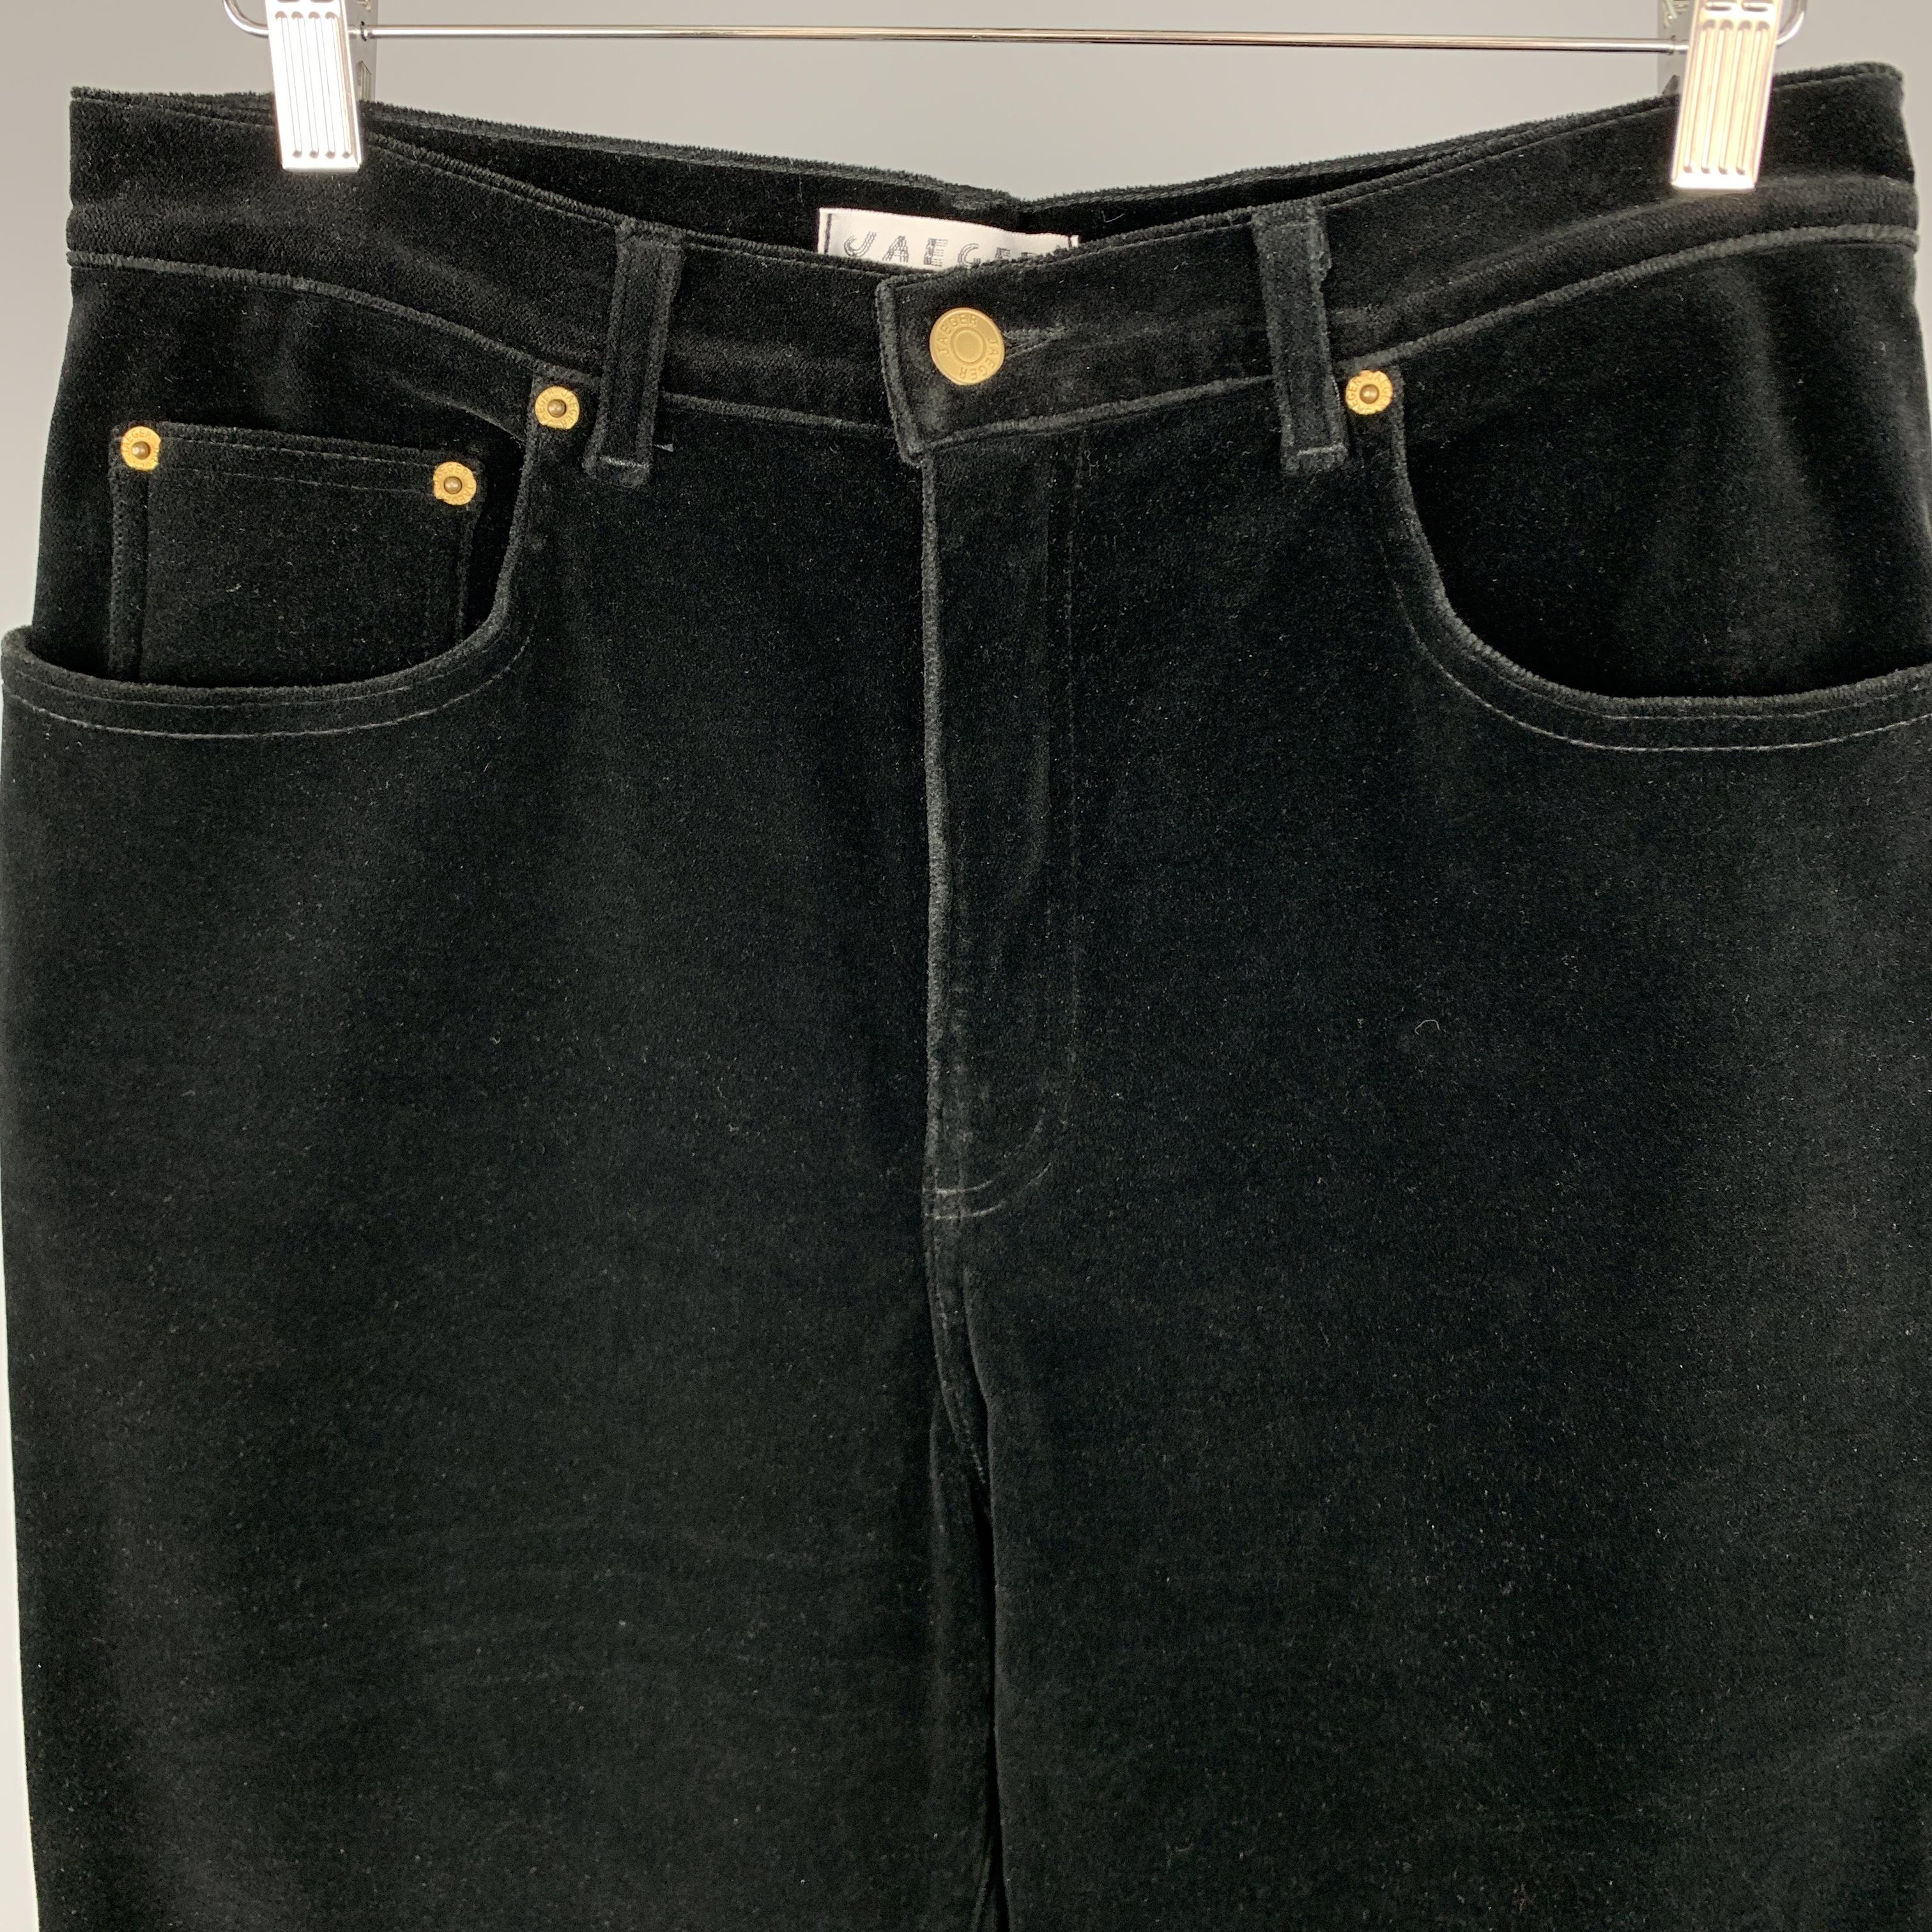 JAEGER pants come in black stretch velvet in a classic five pocket cut. Made in France.

Excellent Pre-Owned Condition.
Marked: US 12

Measurements:

Waist: 32 in.
Rise: 13 in.
Inseam: 28 in.